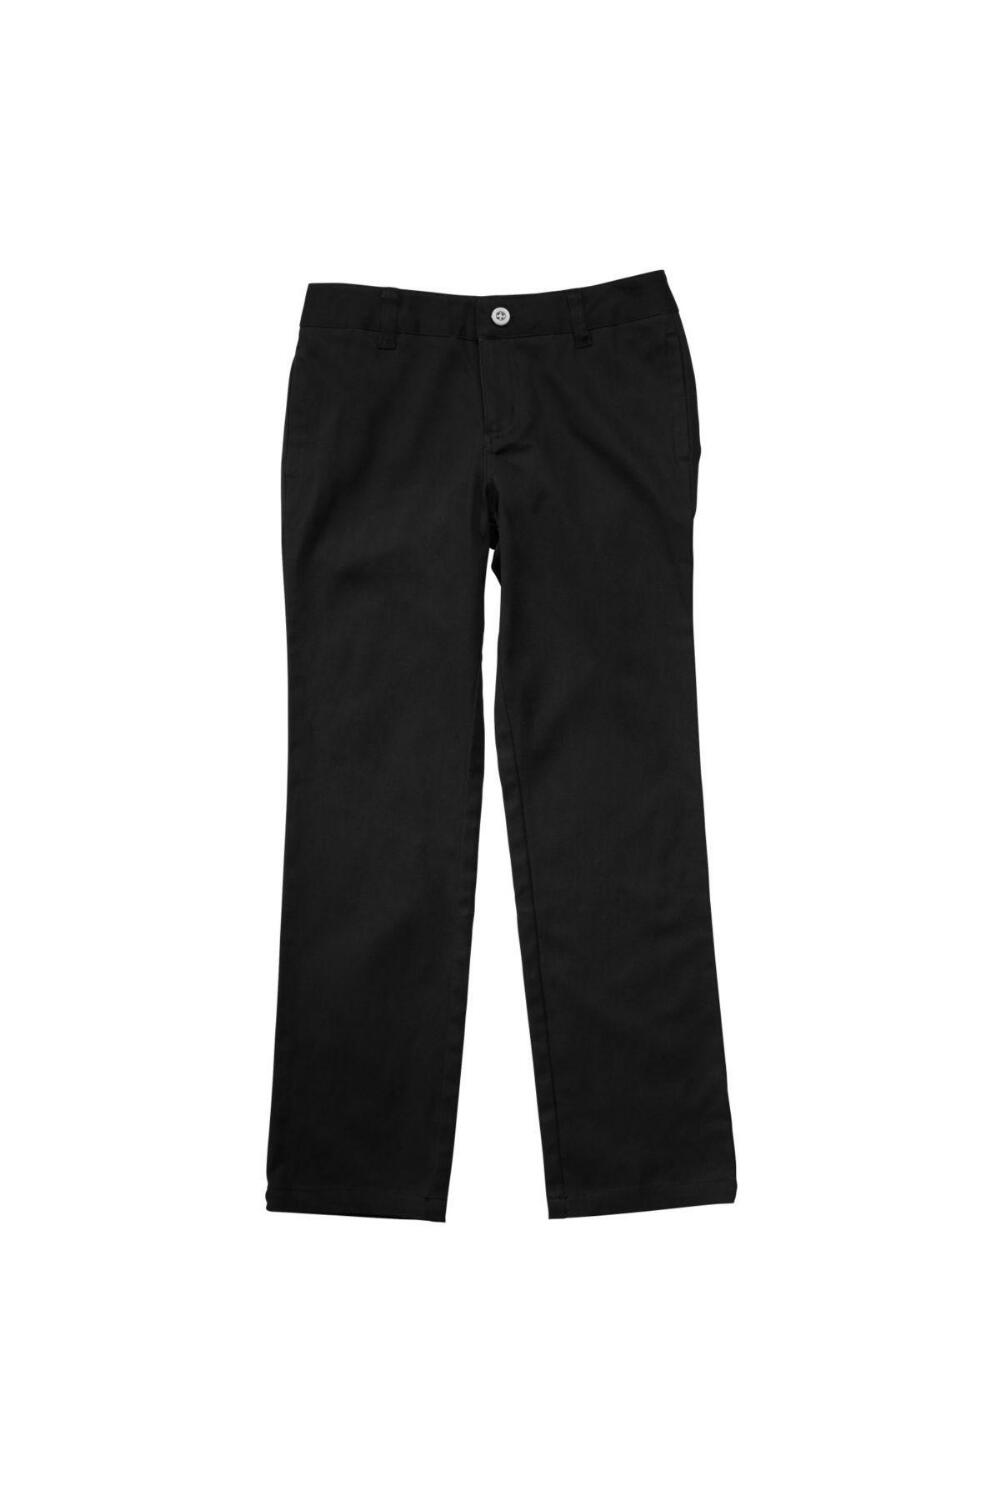 French Toast Girl's Straight Leg Twill Pant (Pant Color: Black, Pant Size: Size 18)